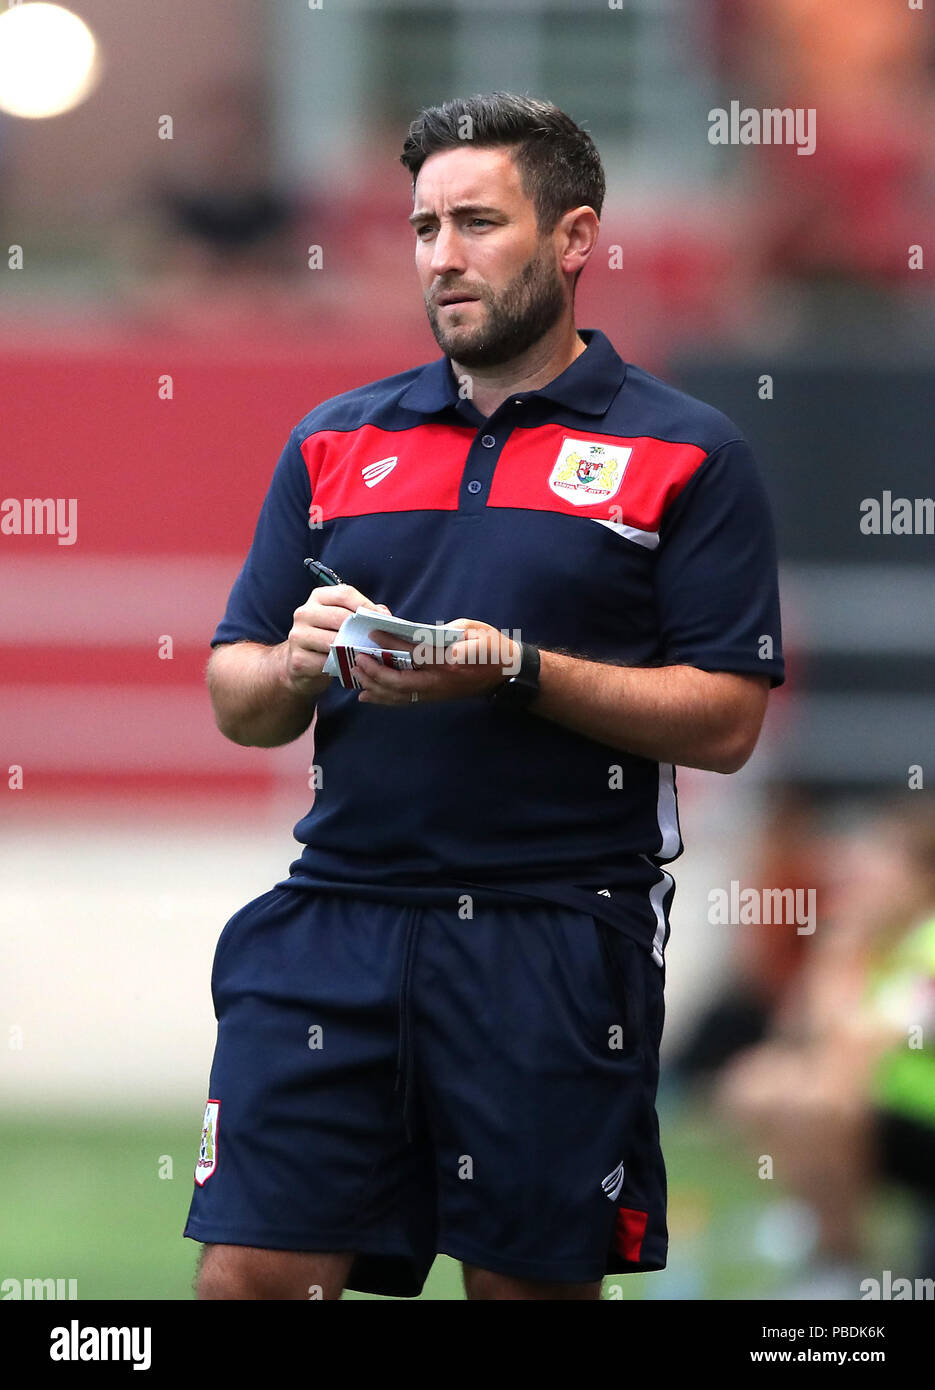 Bristol City Head Coach Lee Johnson during a pre-season friendly match at Ashton Gate, Bristol. PRESS ASSOCIATION Photo. Picture date: Friday July 27, 2018. See PA story SOCCER Bristol City. Photo credit should read: Nick Potts/PA Wire. No use with unauthorised audio, video, data, fixture lists, club/league logos or 'live' services. Online in-match use limited to 75 images, no video emulation. No use in betting, games or single club/league/player publications. Stock Photo